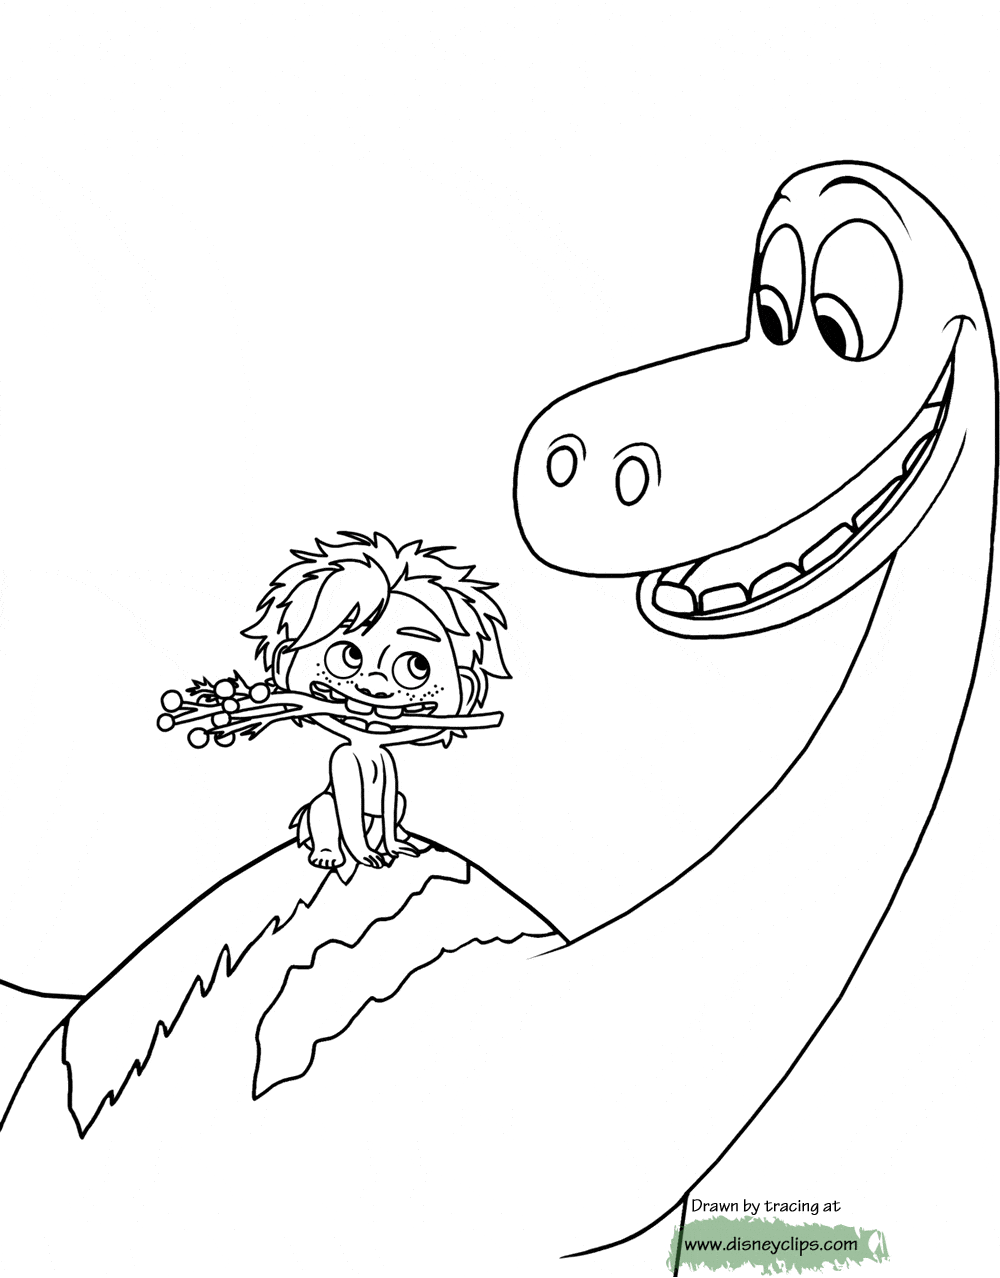 The Good Dinosaur Coloring Pages | Disneyclips.com